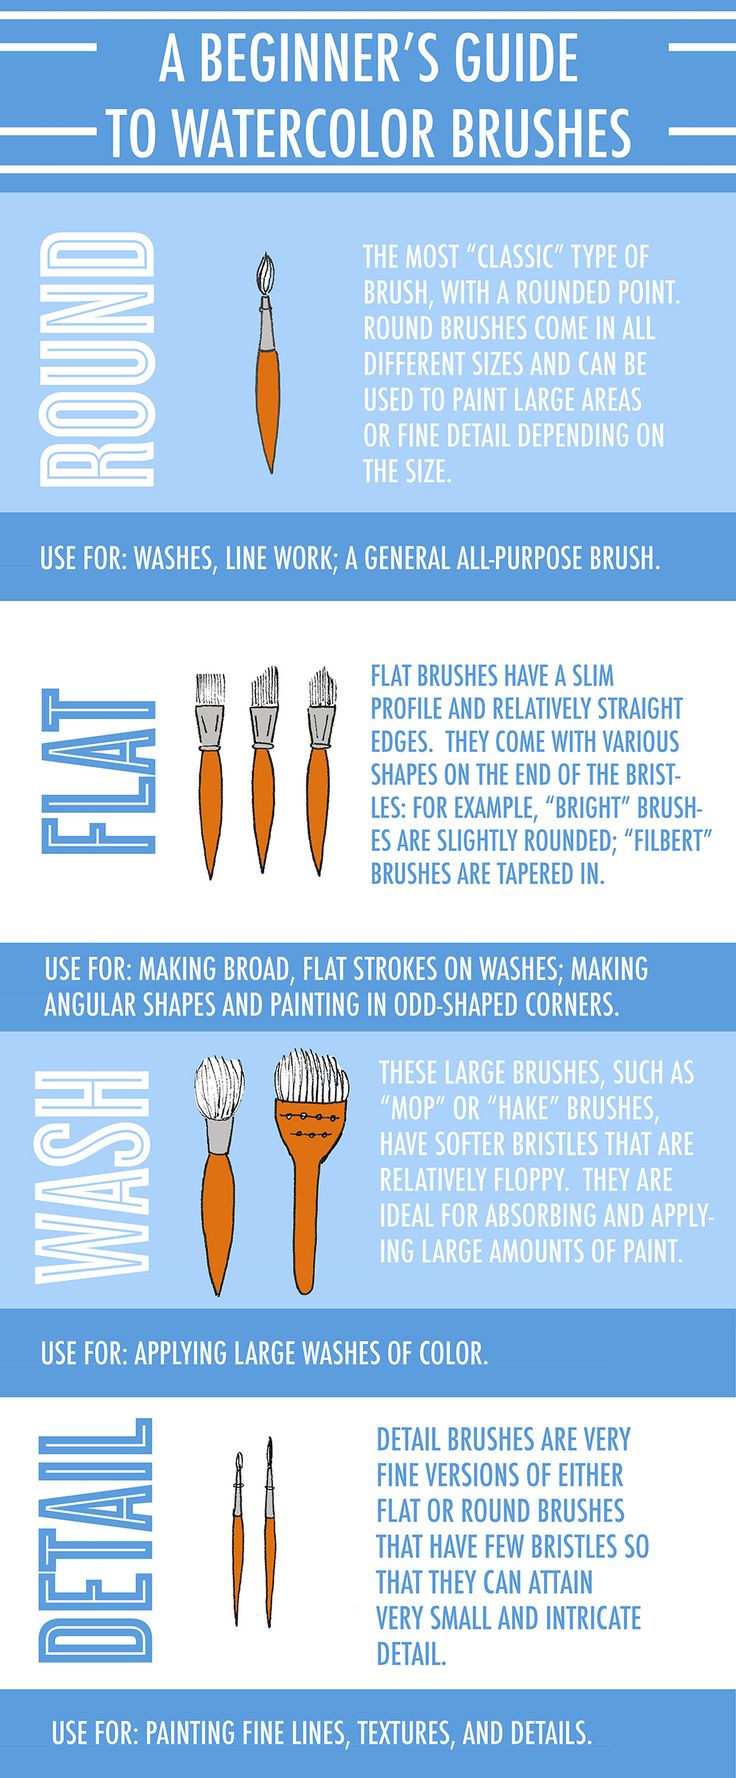 Types of Watercolor Brushes